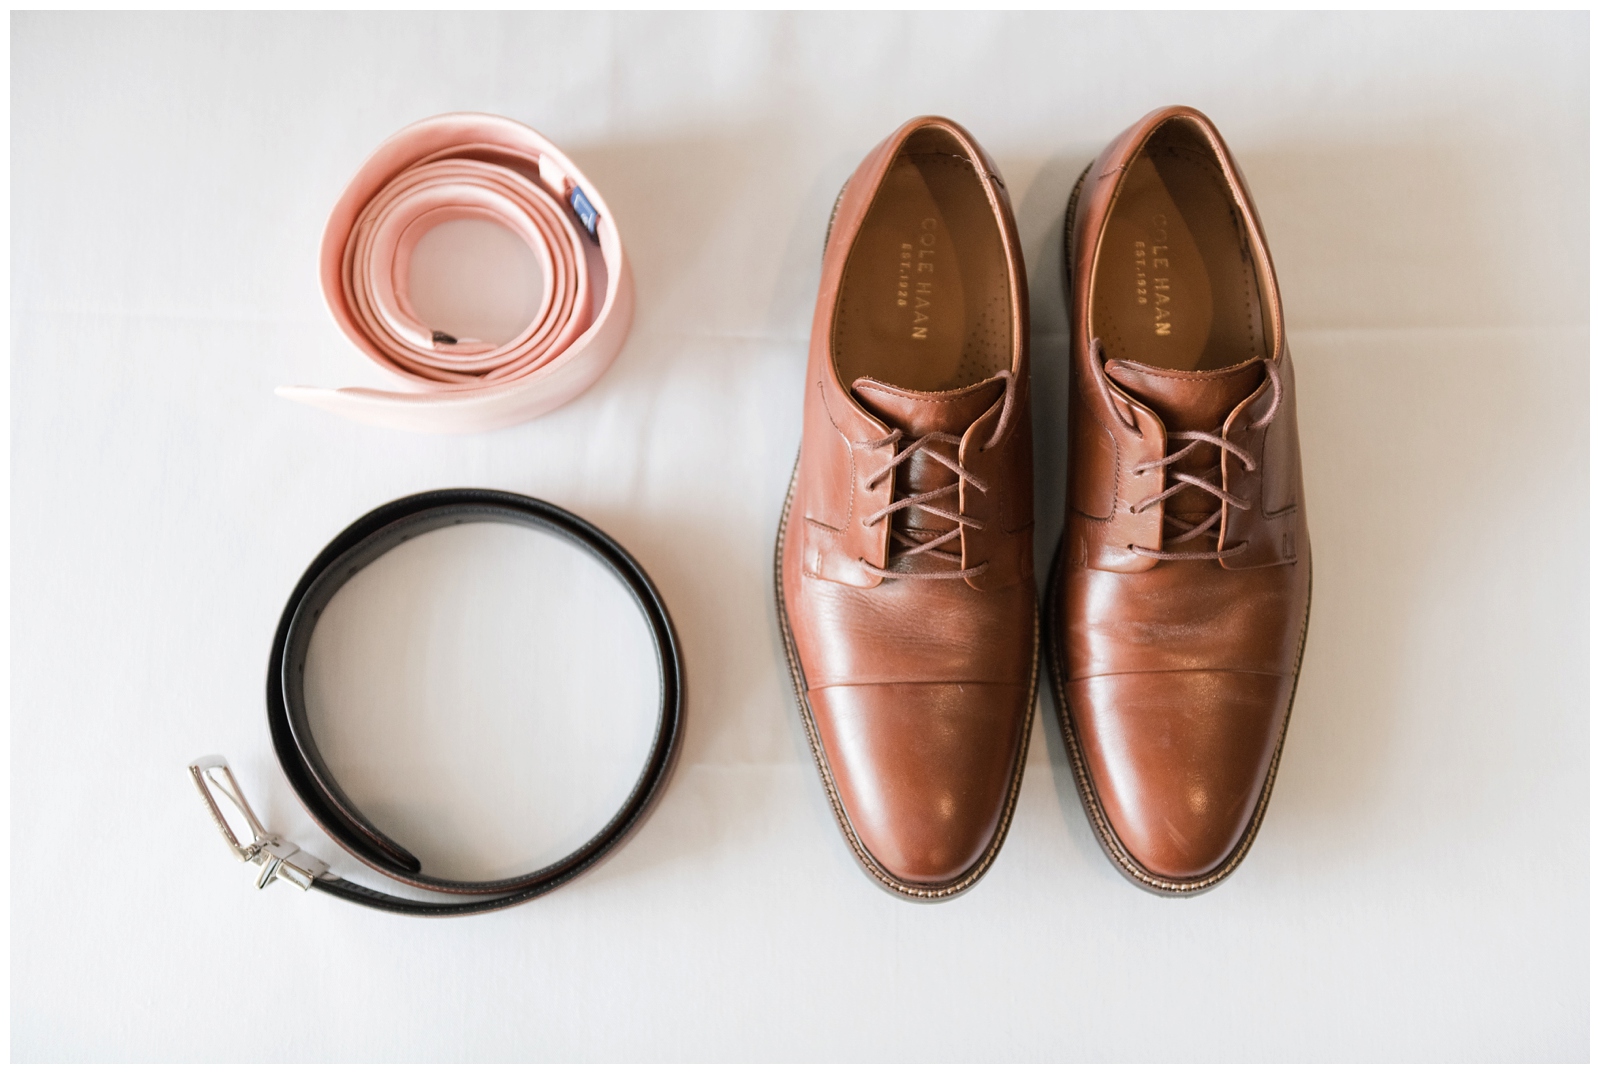 groom's brown shoes, pink tie, and belt photographed by Ohio wedding photographer Pipers Photography